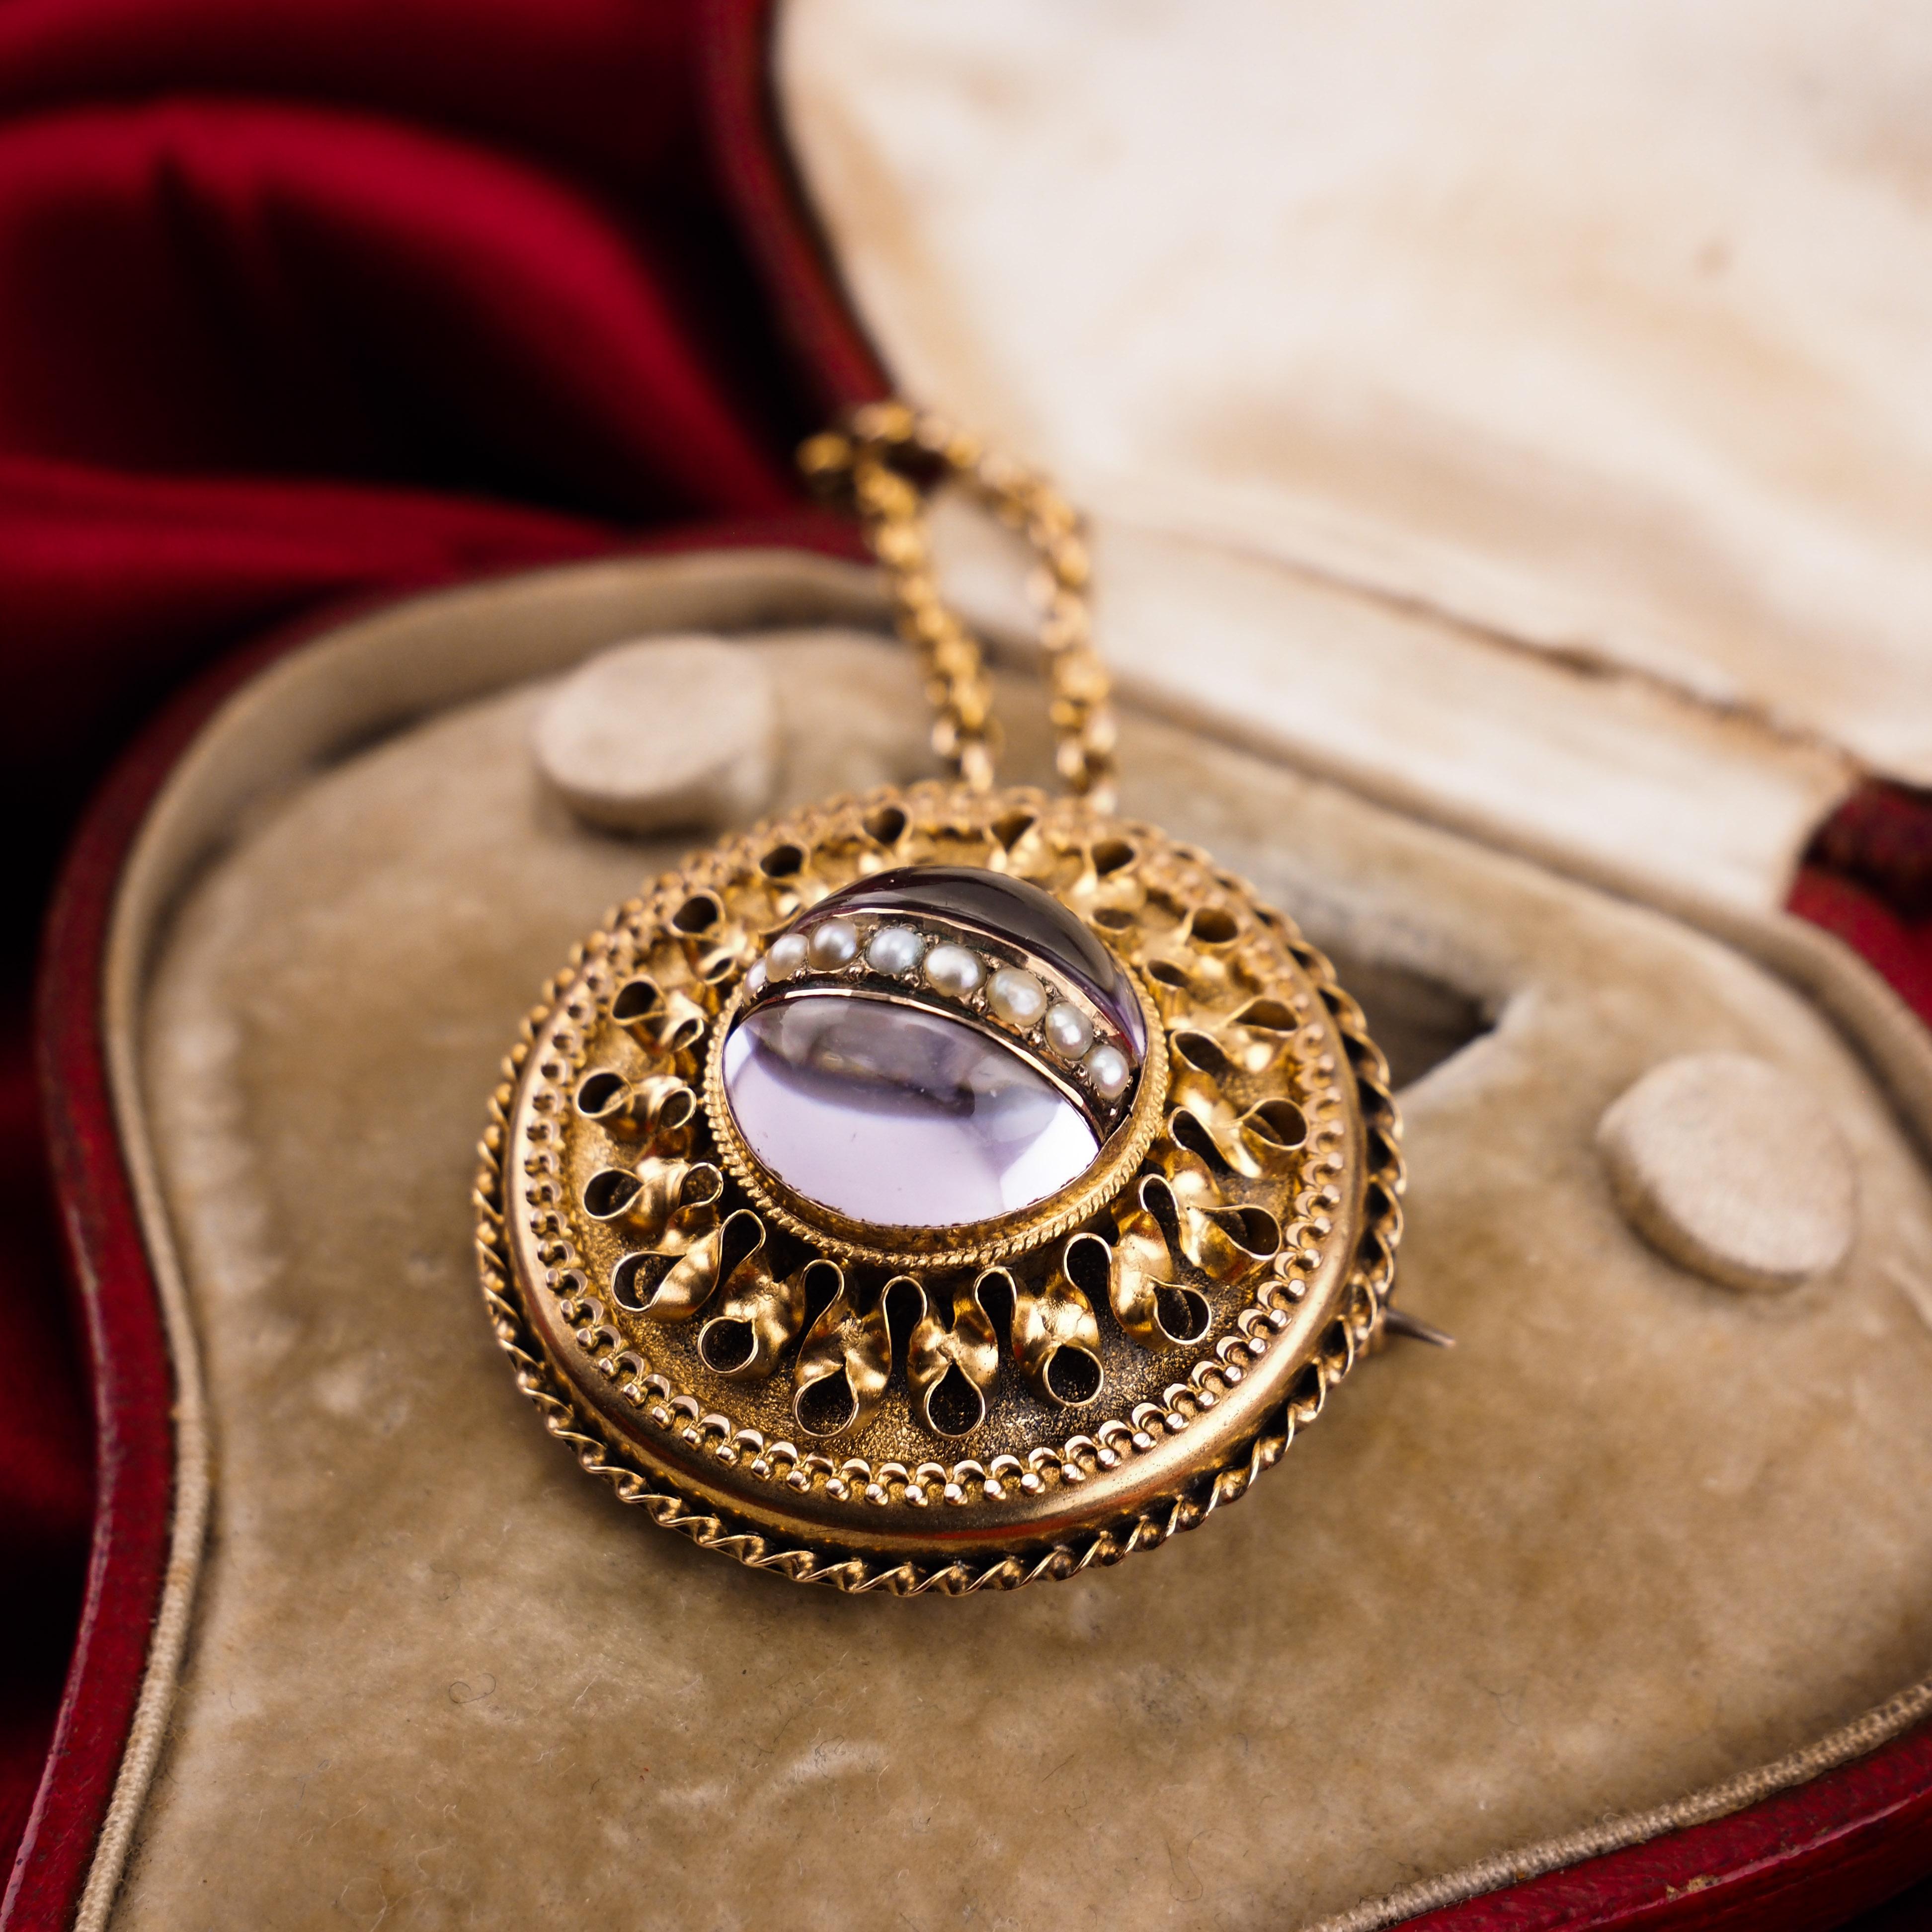 We are delighted to offer this spectacular antique Victorian rock crystal cabochon pendant necklace made with 15ct solid gold in the Victorian era, c.1870. (*Please note: all other items are for display purposes only and this listing is for the item